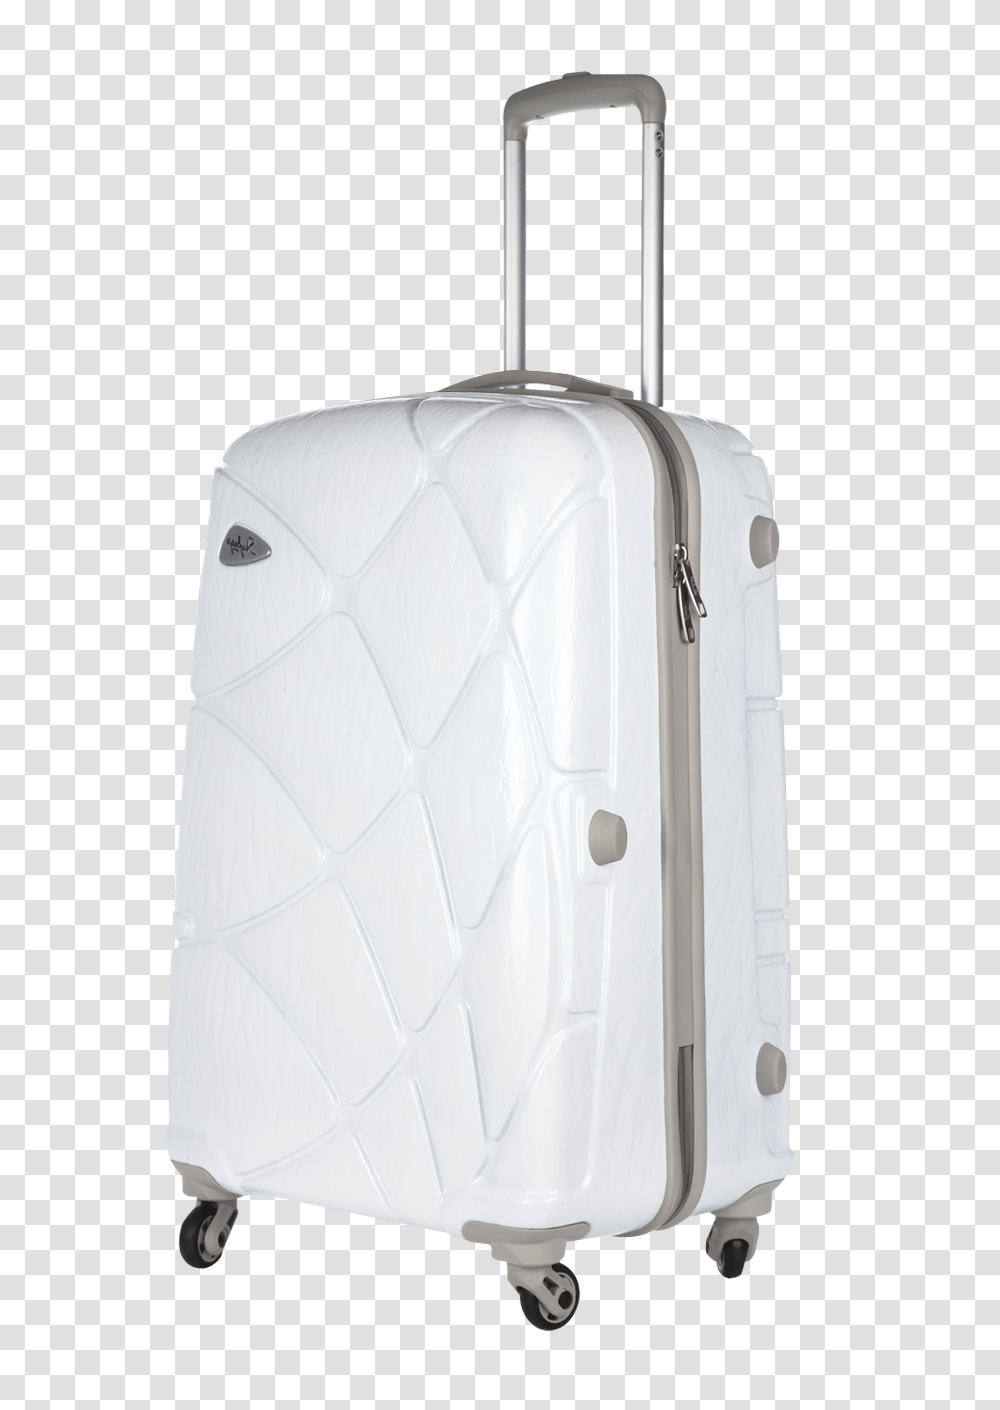 Strolley Bag Image, Luggage, Suitcase Transparent Png